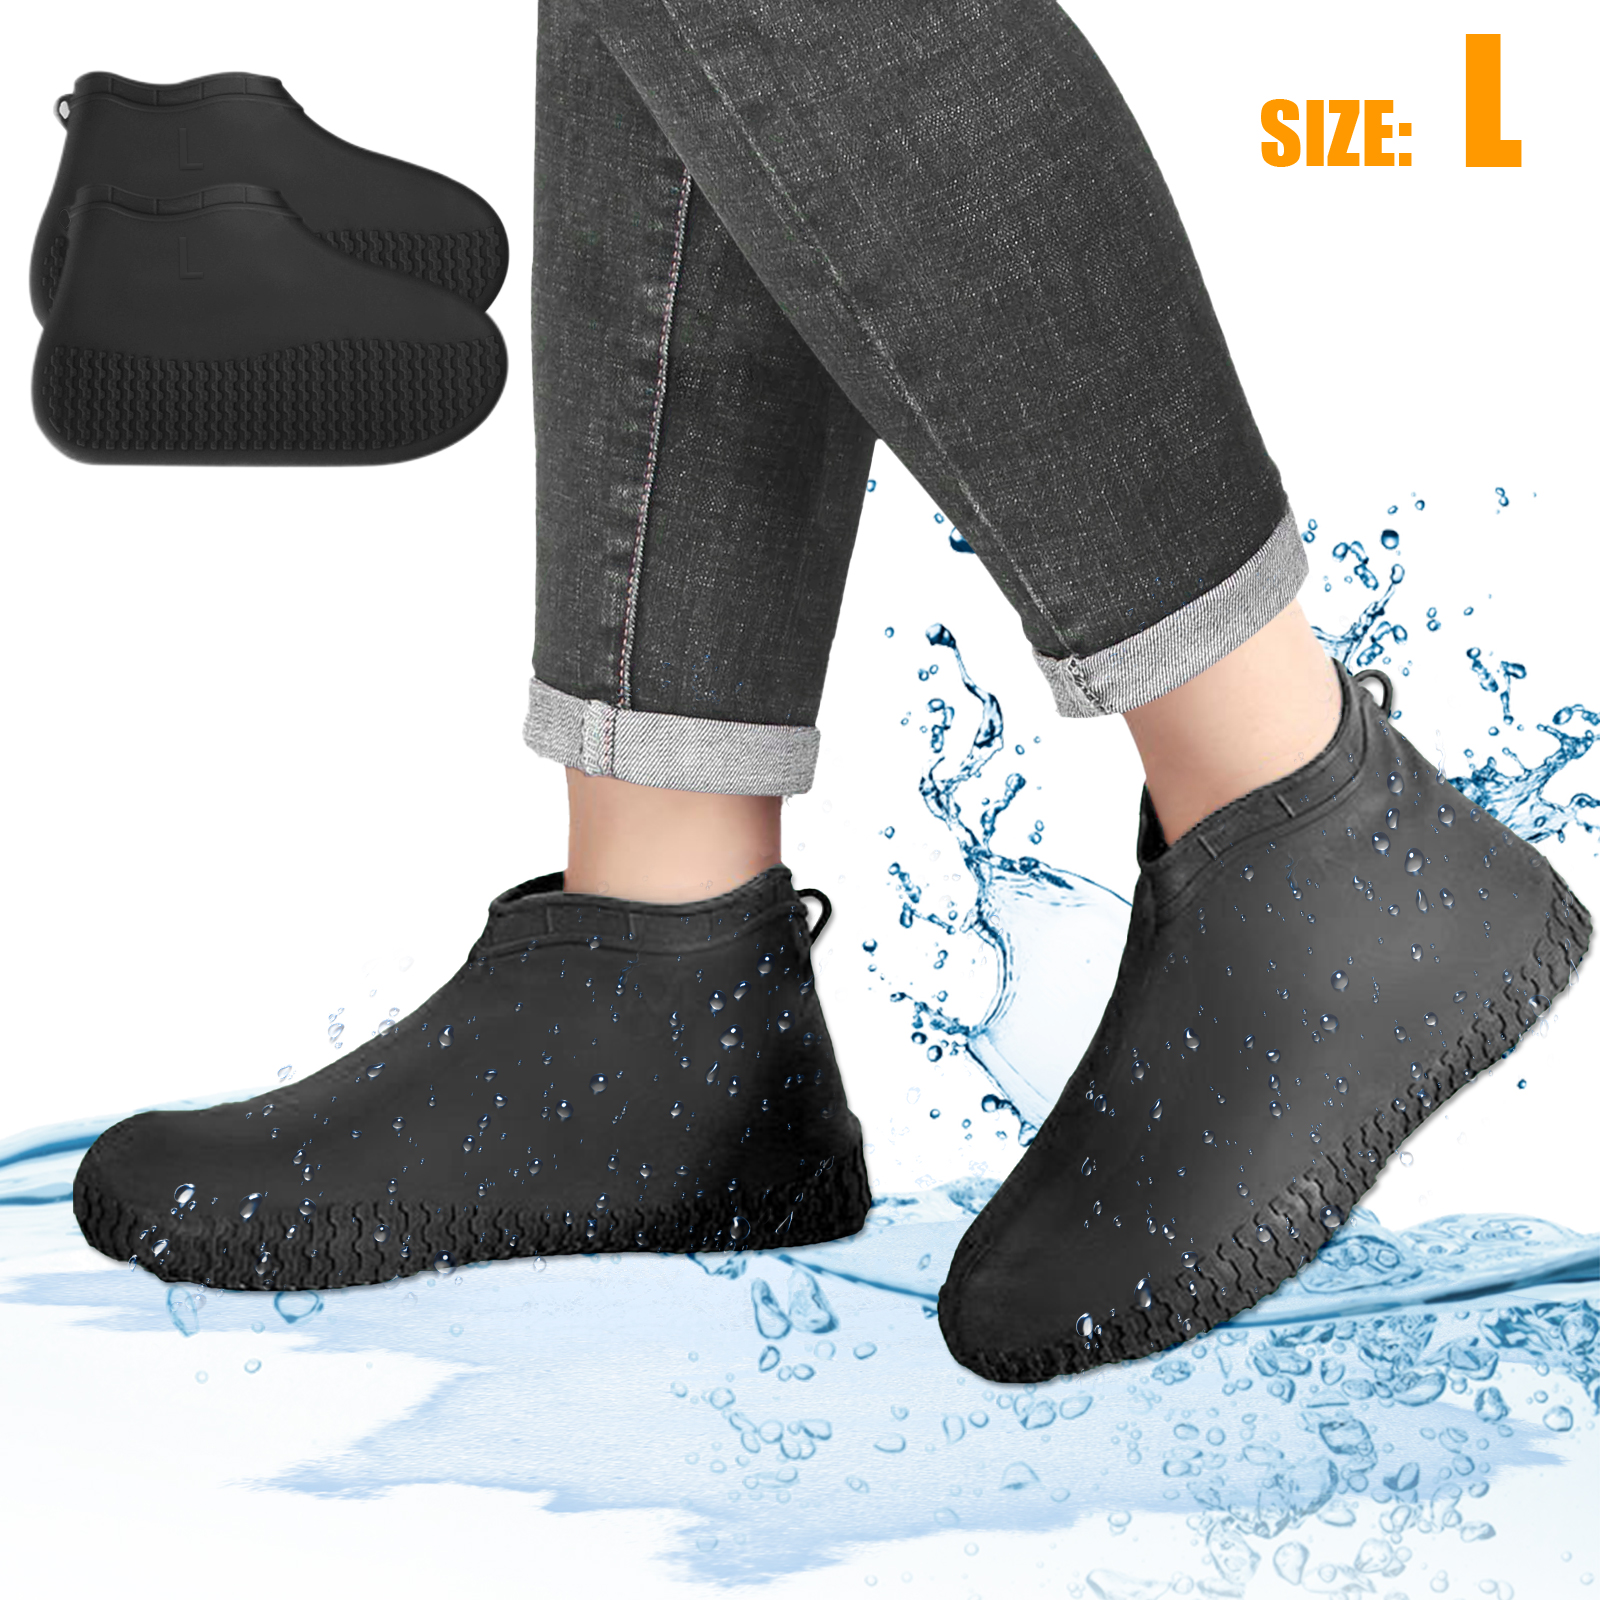 Silicone Recyclable Overshoes Unisex Rain Shoe Waterproof Shoe Covers Boot Cover 